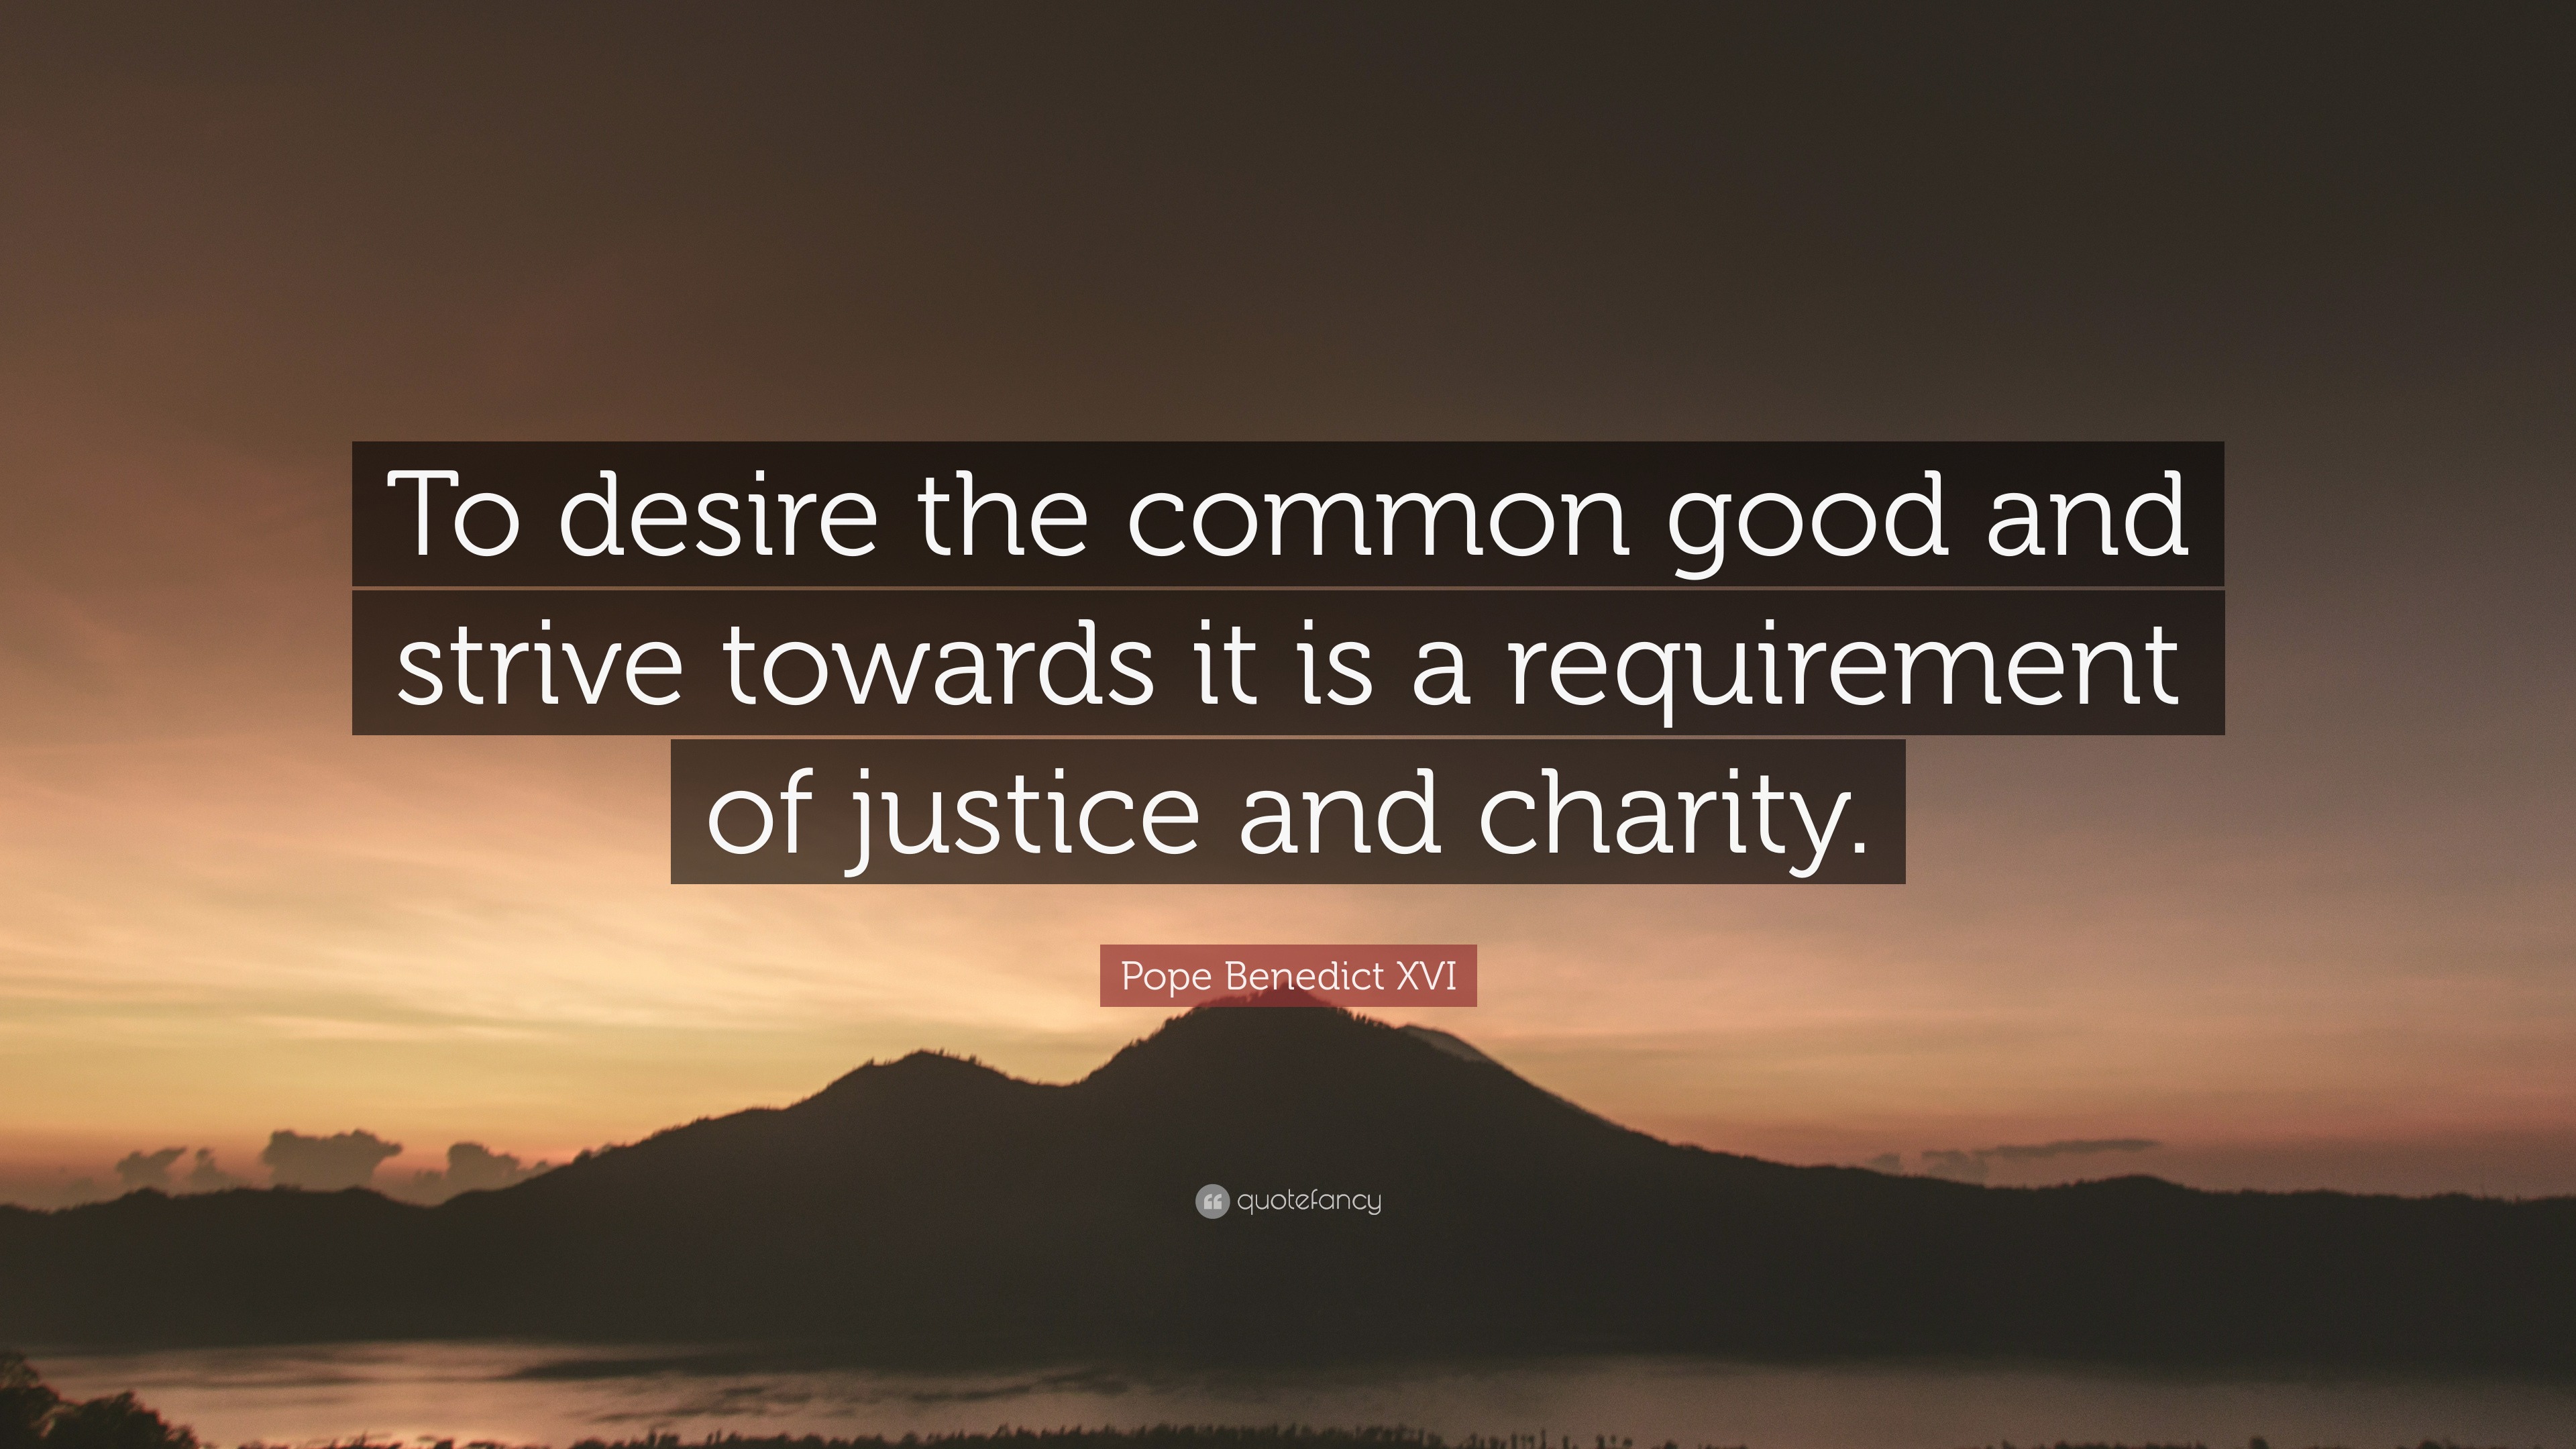 For the Common Good by Herman E. Daly